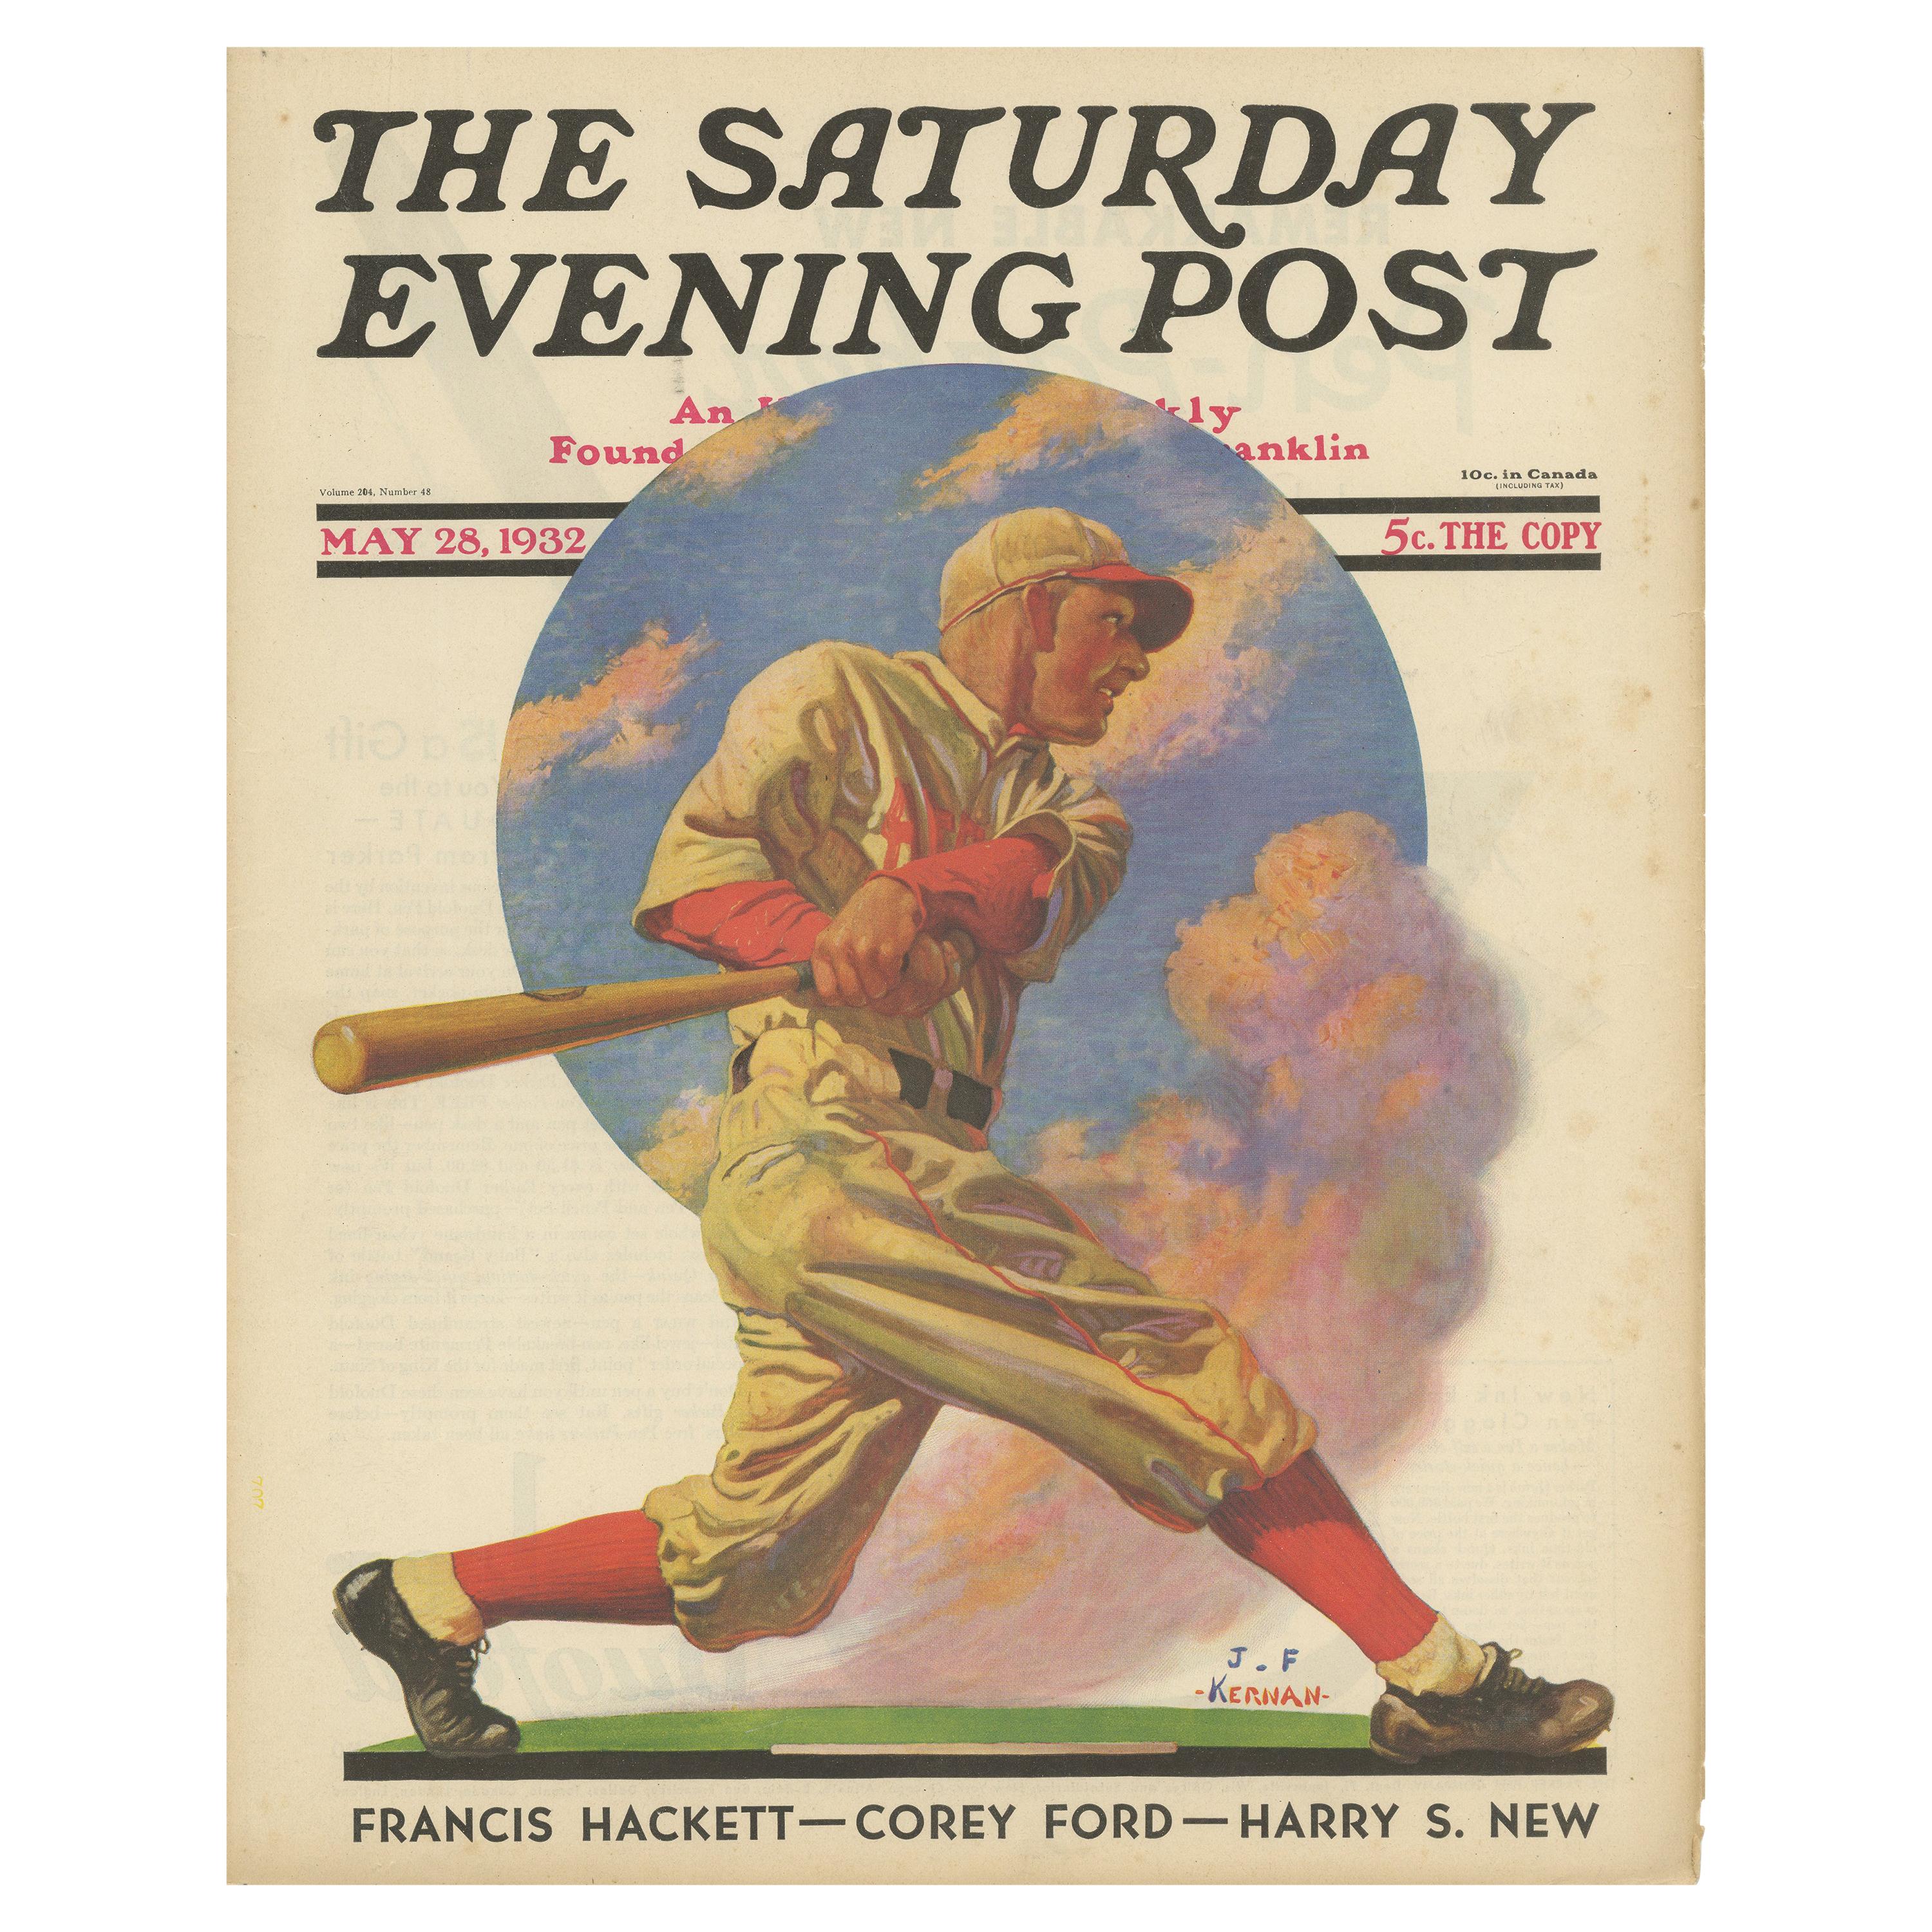 Vintage Print of a Baseball Batter 'The Saturday Evening Post' '1932'